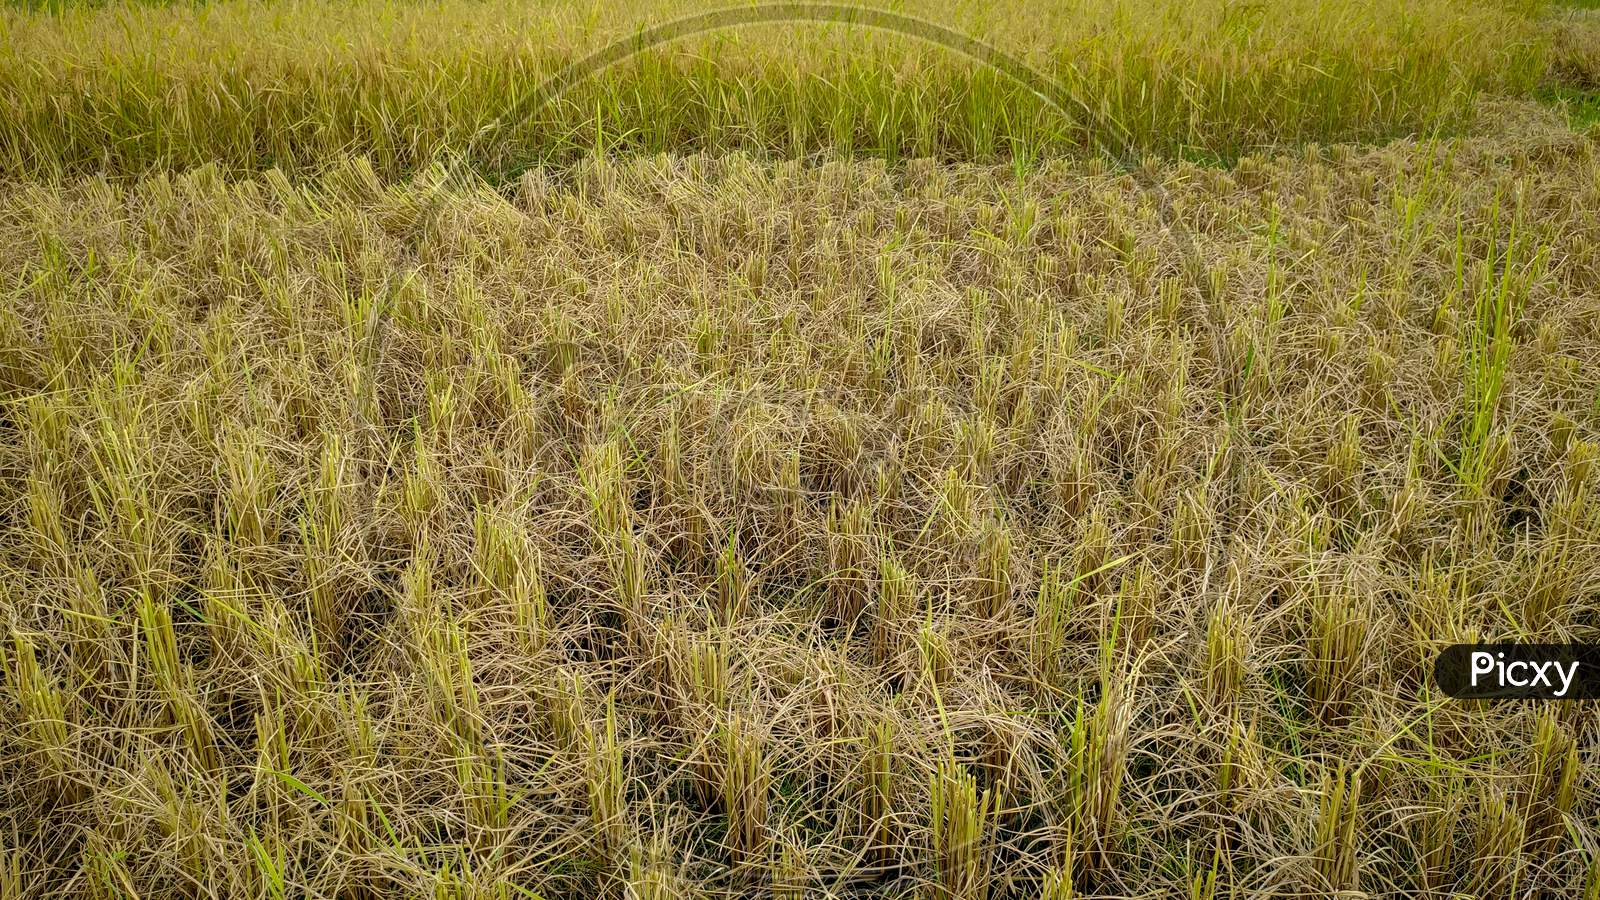 image of harvested rice paddy field background